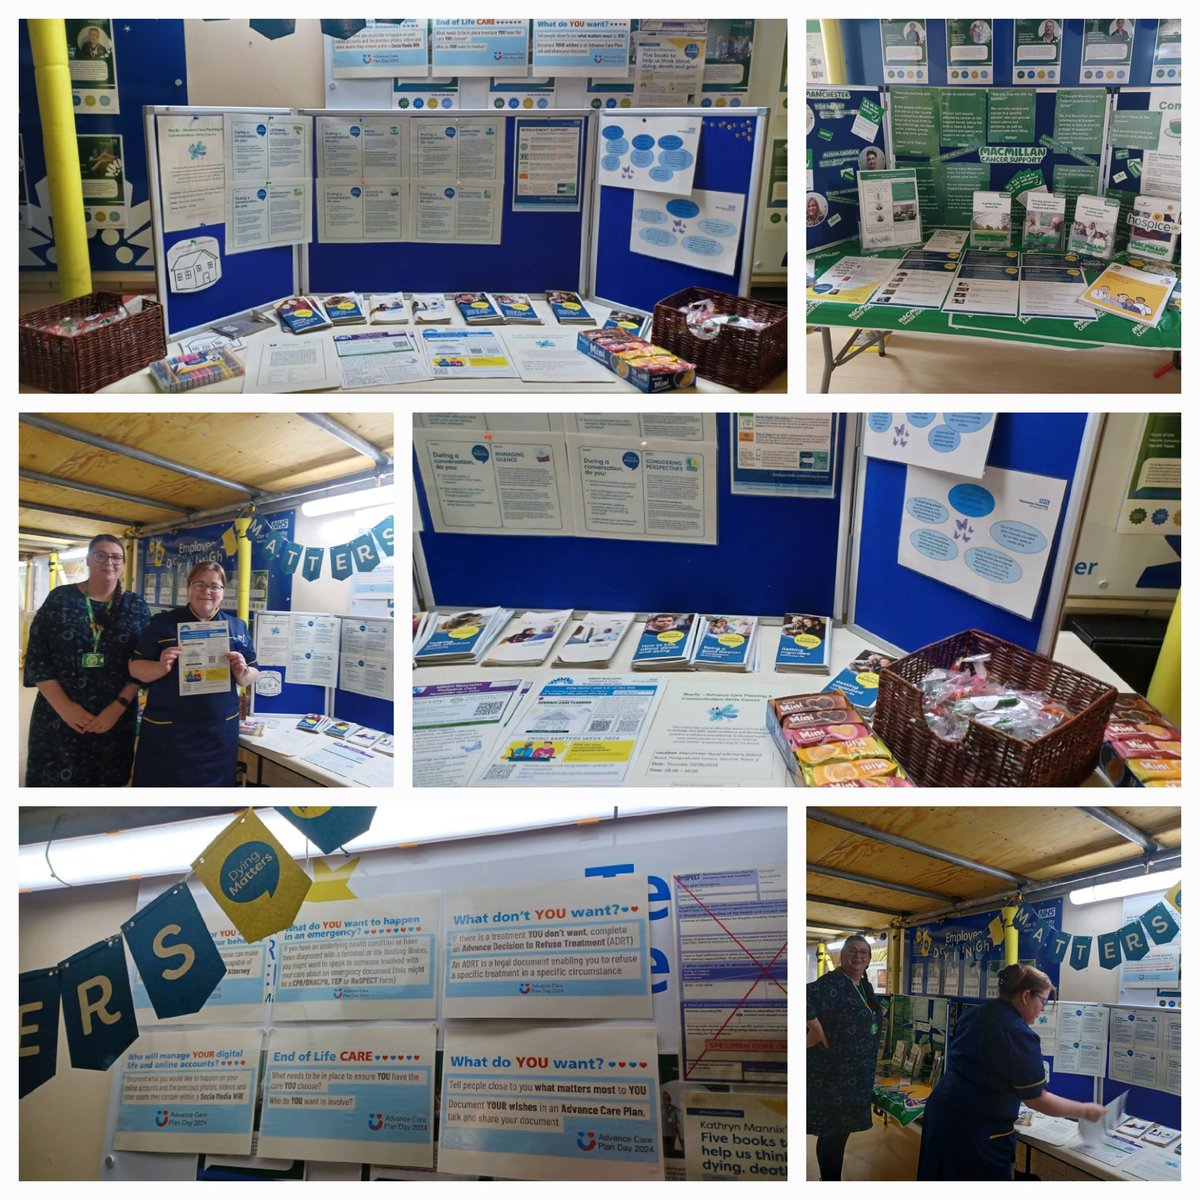 Come and join us in The Gallery corridor to get those conversations started. Lots of resources on offer, sweets and biscuits too! @ACPDay2024 @paulawooparr @EOLC_TeamMRI @SPCTWythenshawe @Kimberley_S_J @DArmstrong70 @NMGNursingfocus @DyingMatters #TheWayWeTalkAboutDyingMatters